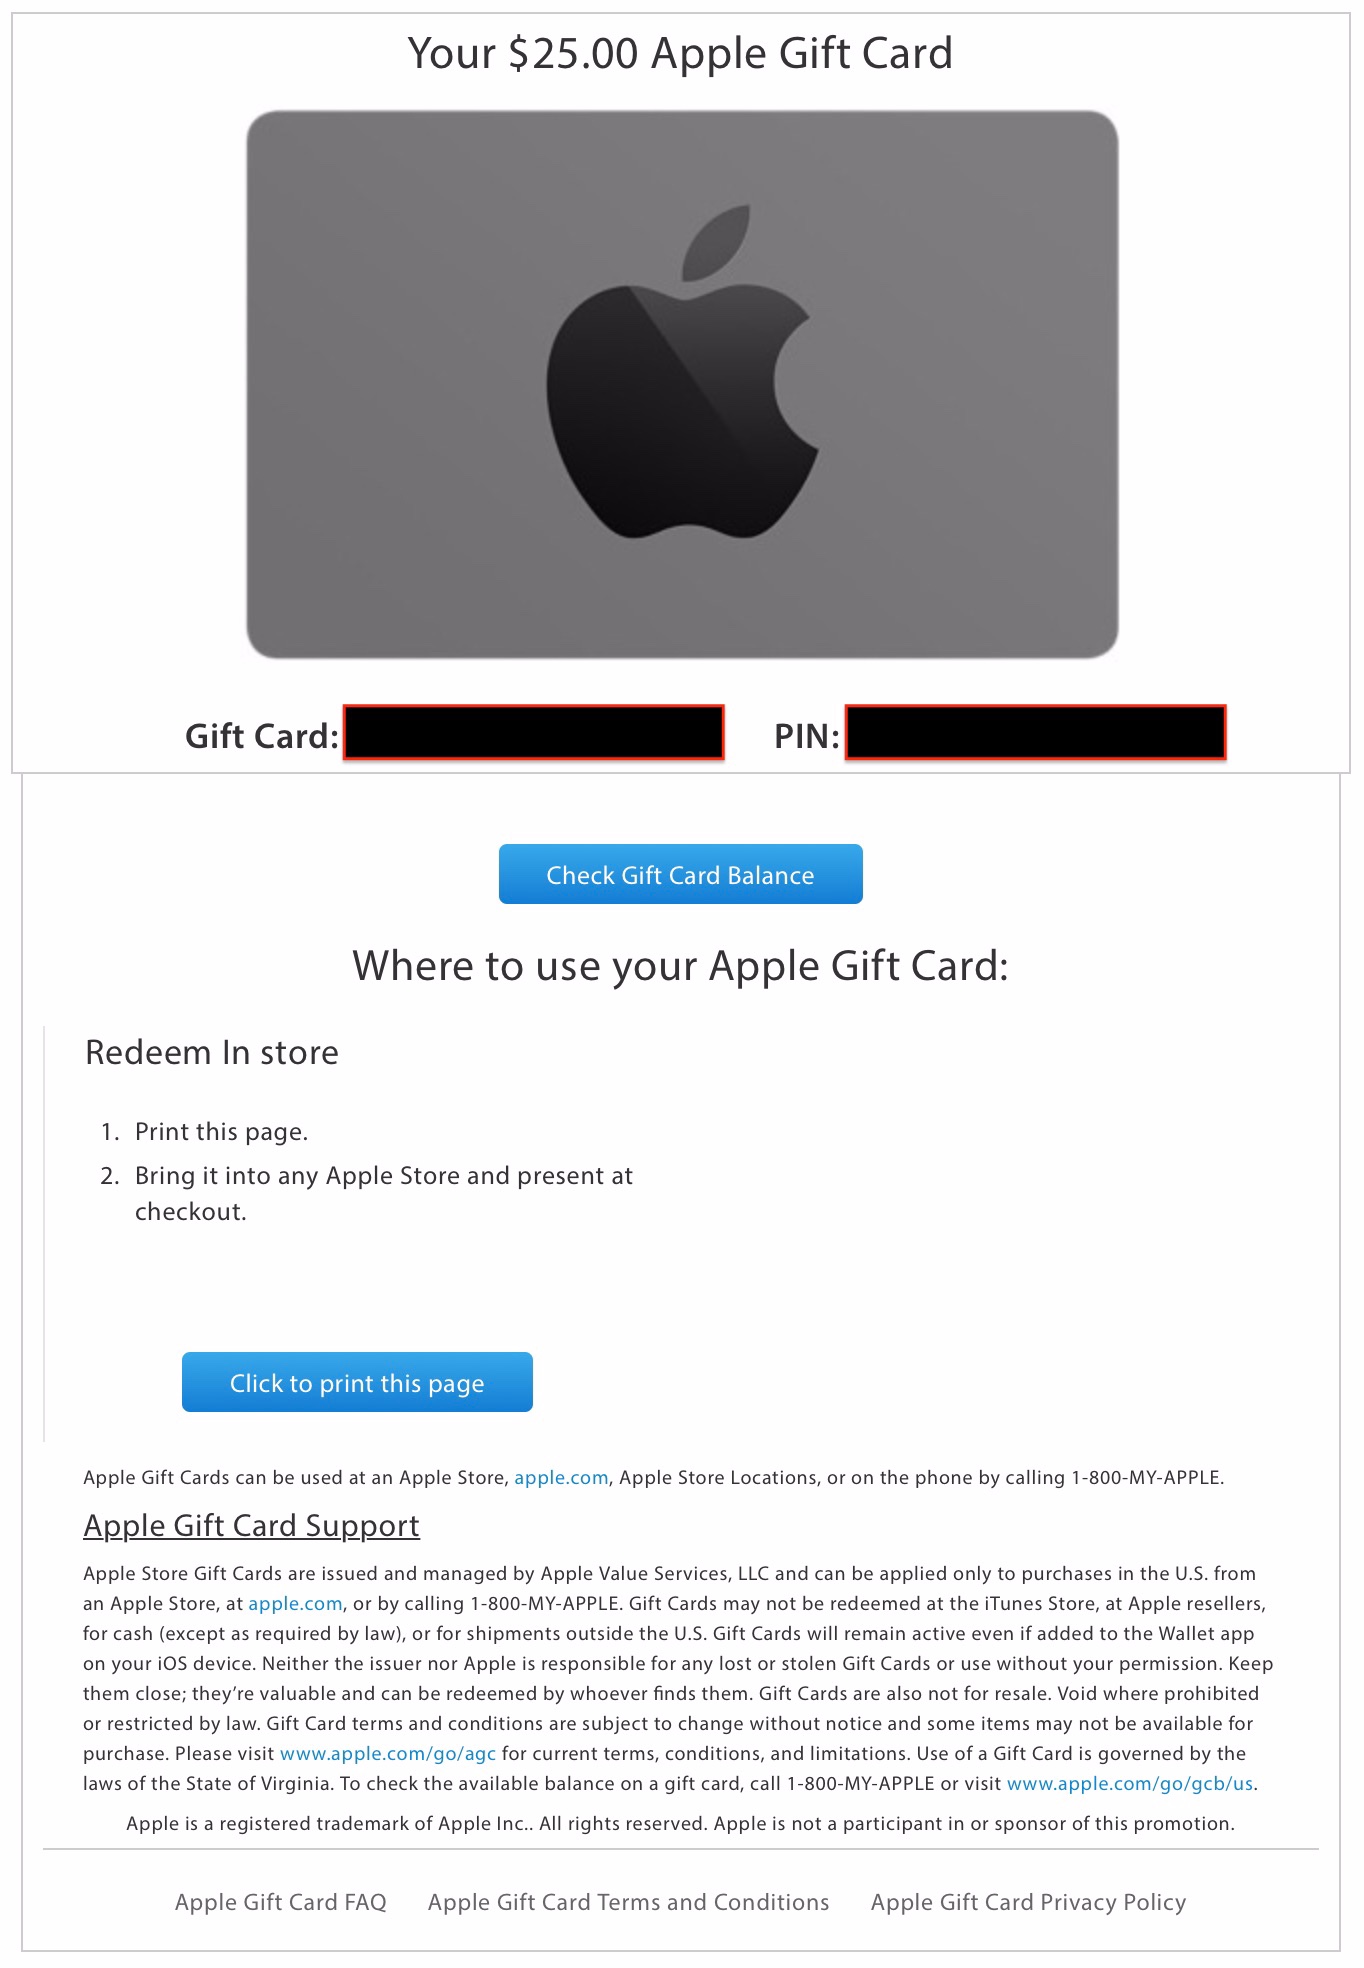 add apple store gift card to wallet without qr code